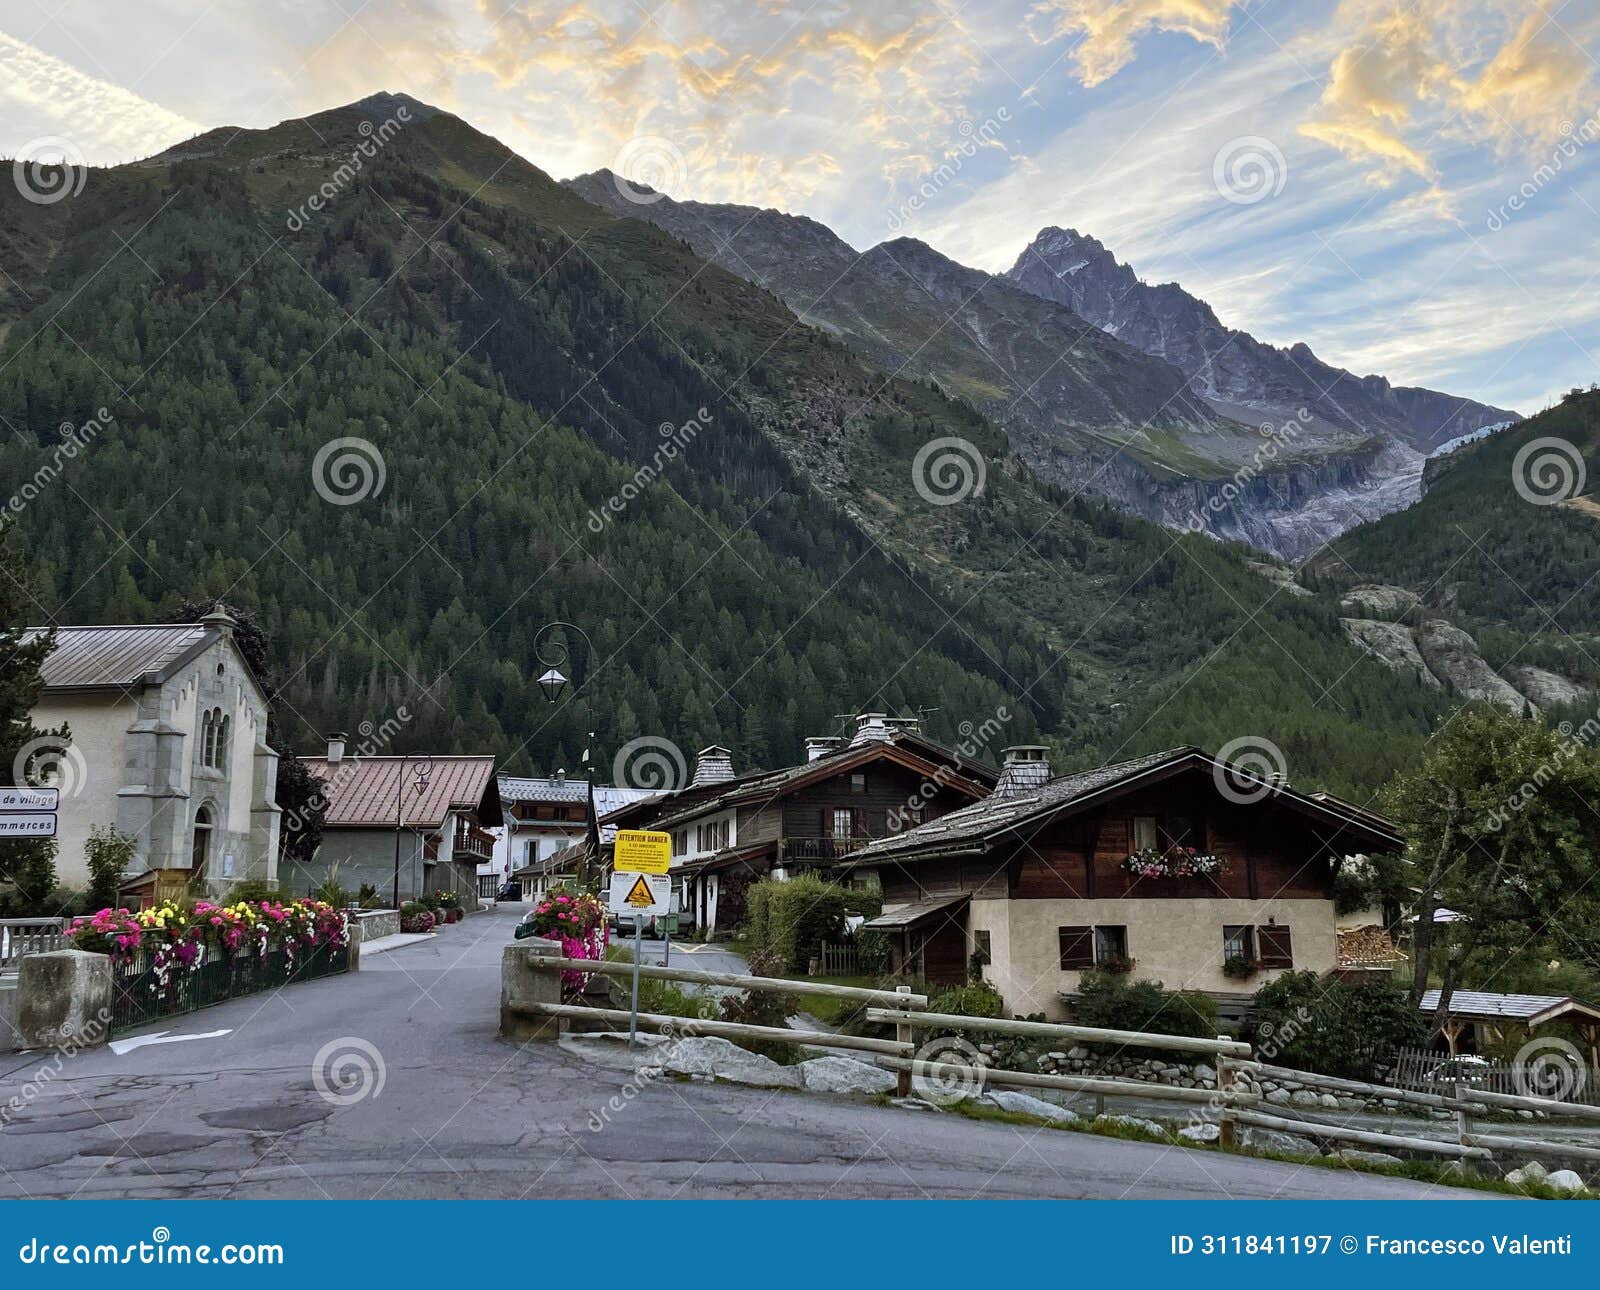 chamonix and argentiere valley: panoramic mountain glacier in grand balcon, chamonix, france